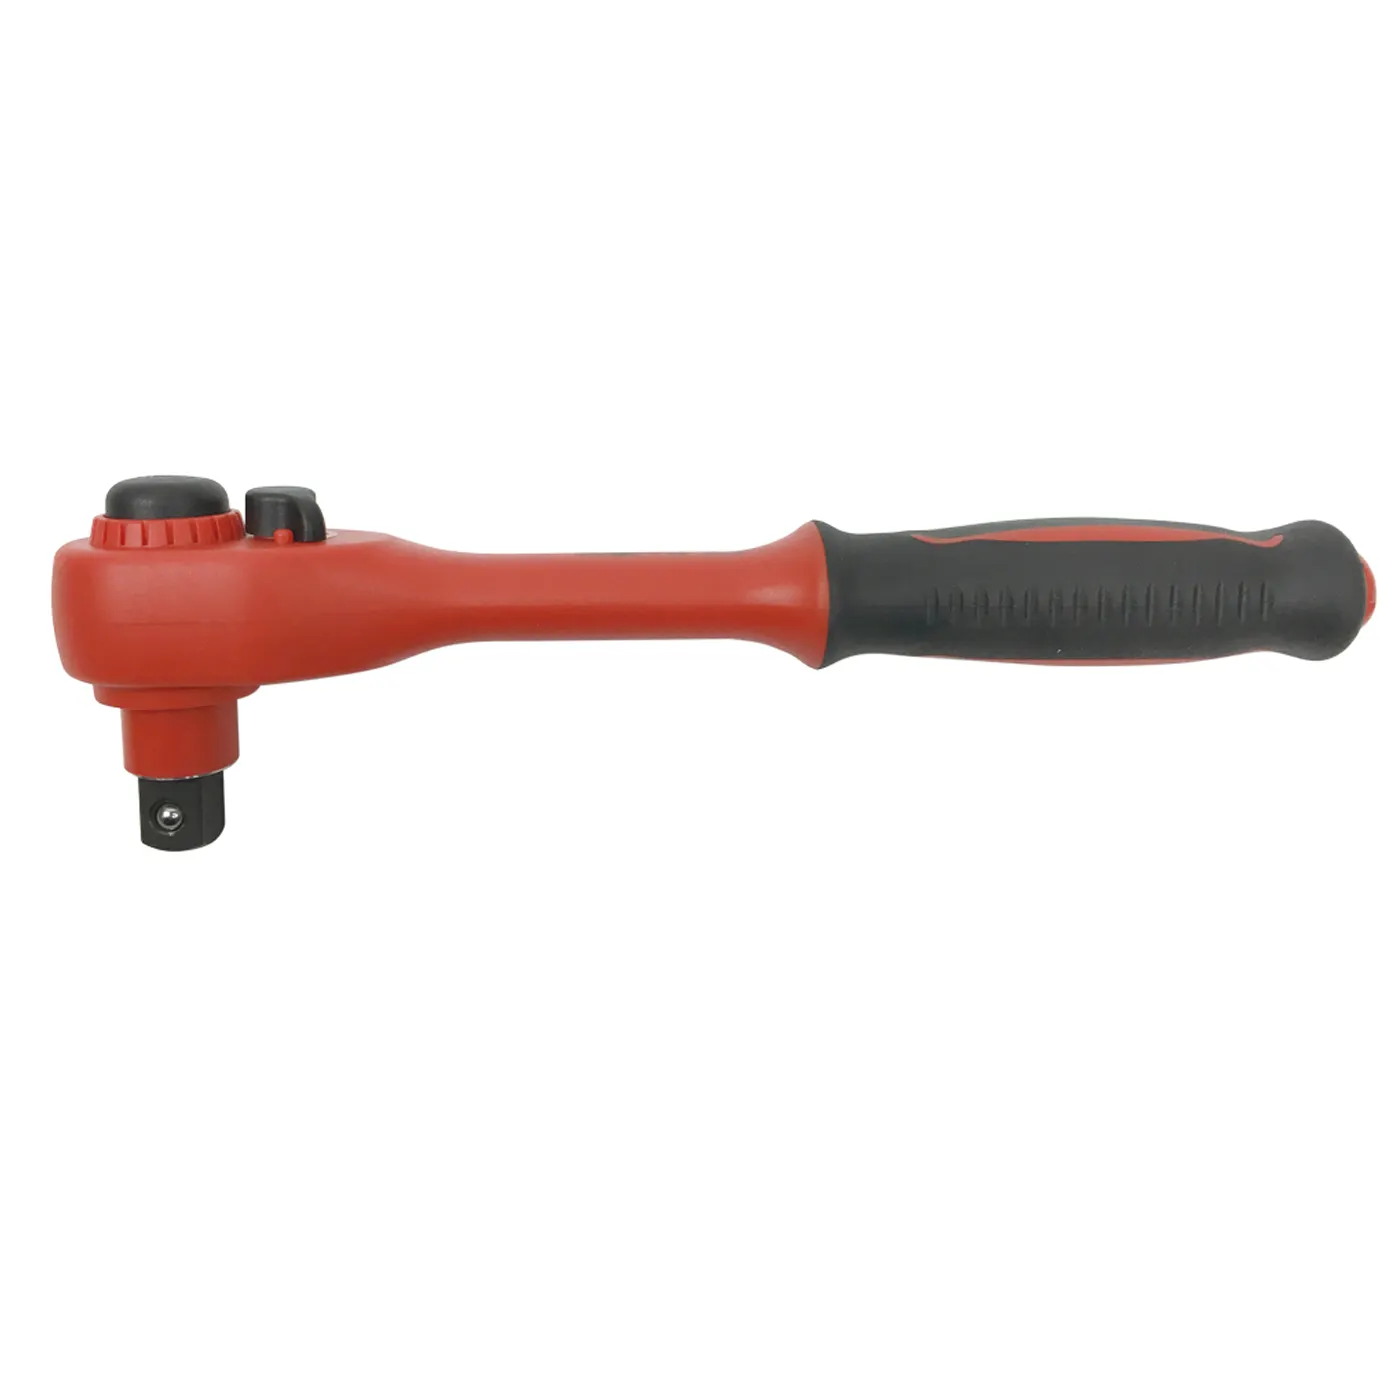 NANYU 1/2" VDE Insulating Ratchet Handle Wrench High Voltage Insulation Tools Ratchet Wrench